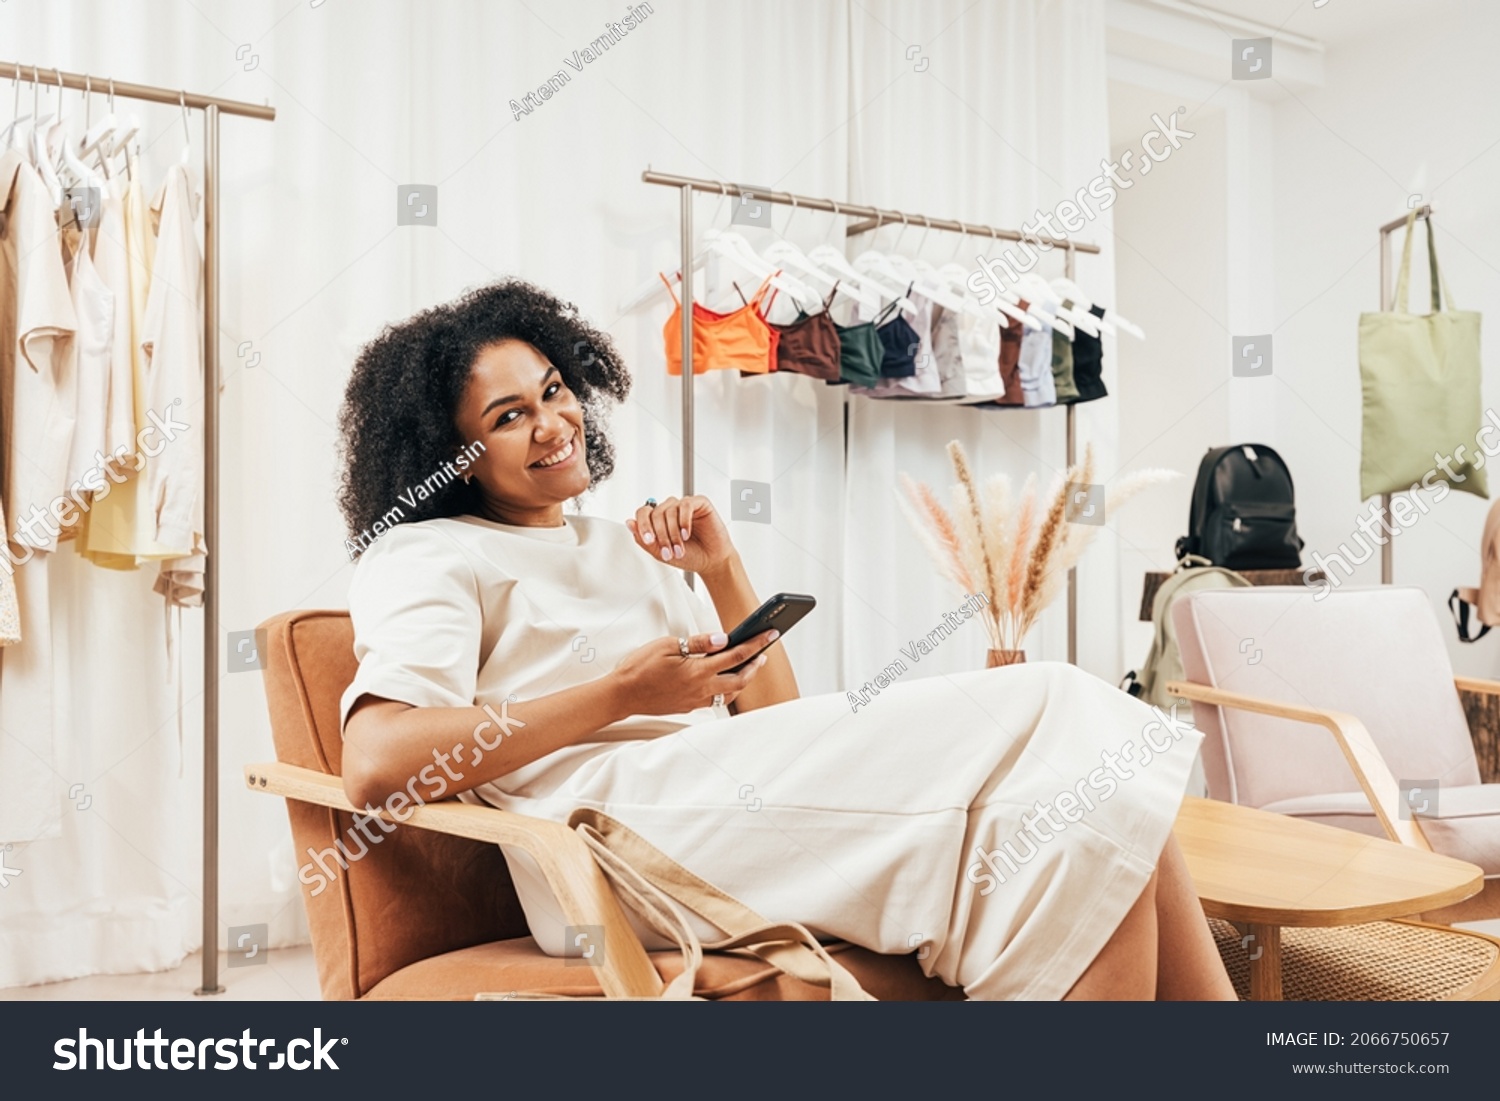 Smiling woman with mobile phone relaxing in small boutique and looking at camera #2066750657